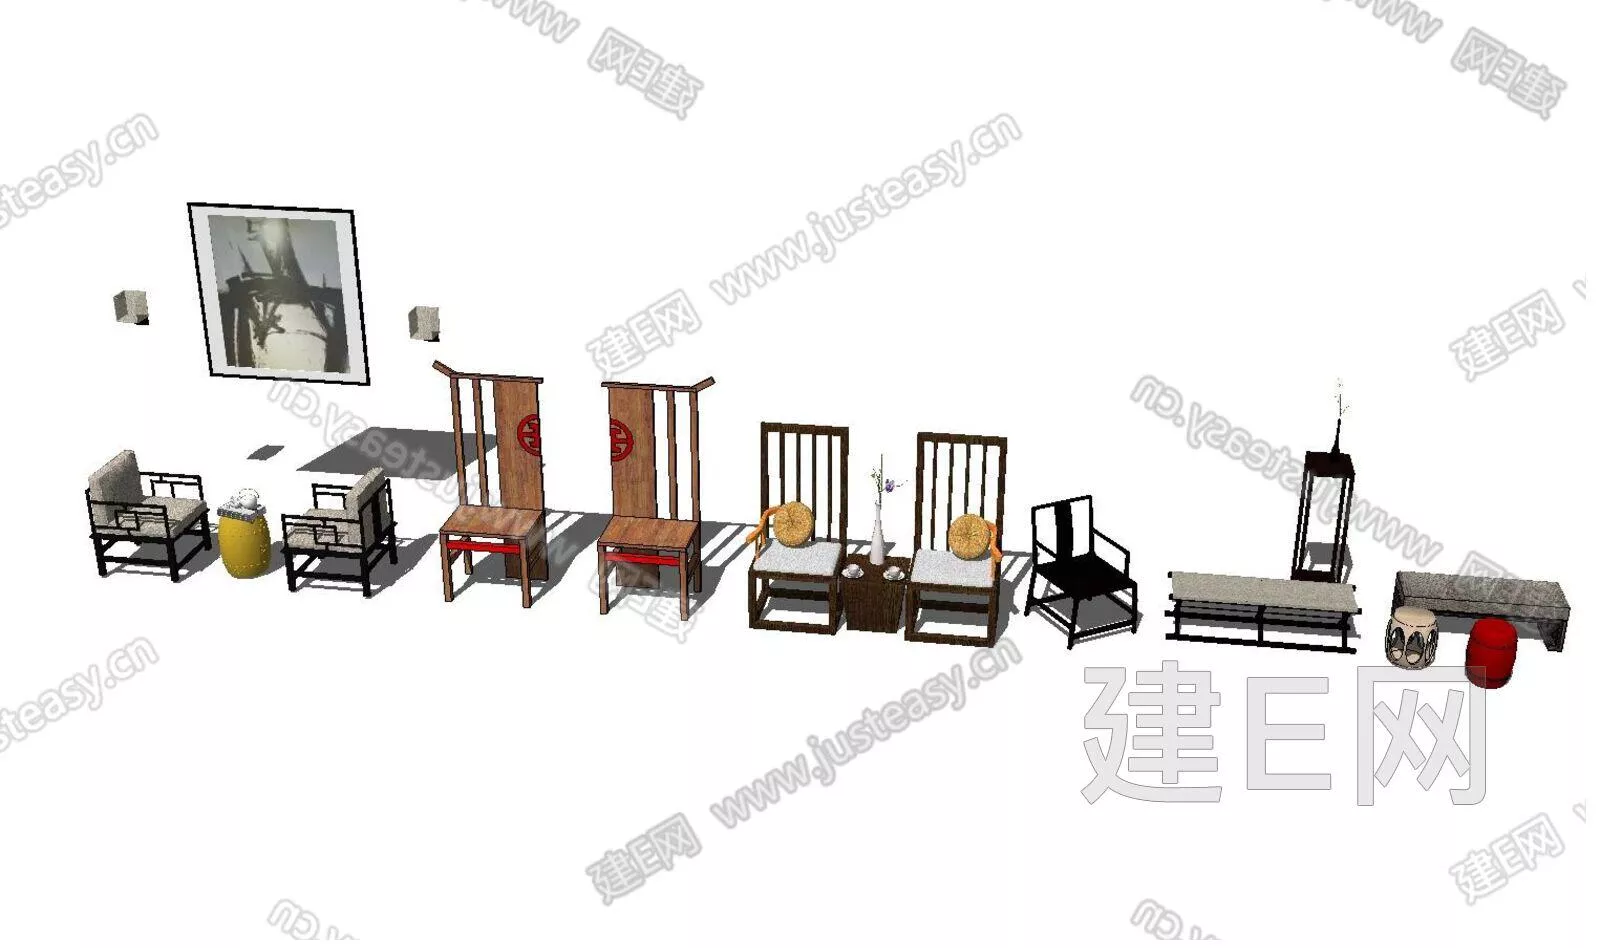 CHINESE OFFICE CHAIR - SKETCHUP 3D MODEL - ENSCAPE - 112476555